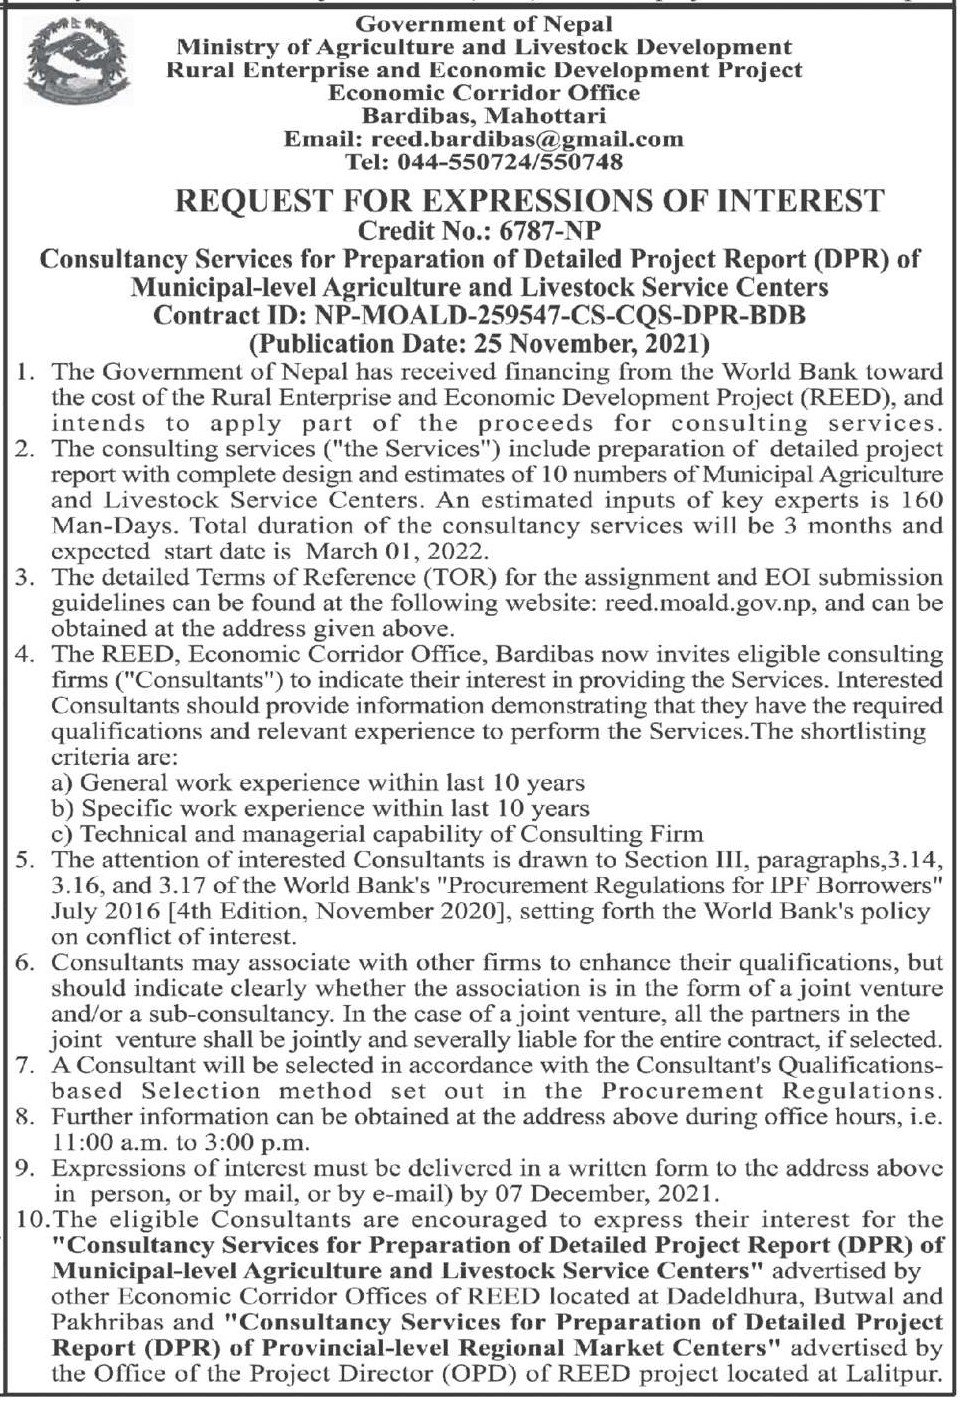 Consultancy Services for Preparation of Detailed Project Report (DPR) of Municipal-level Agriculture and Livestock Service Centers